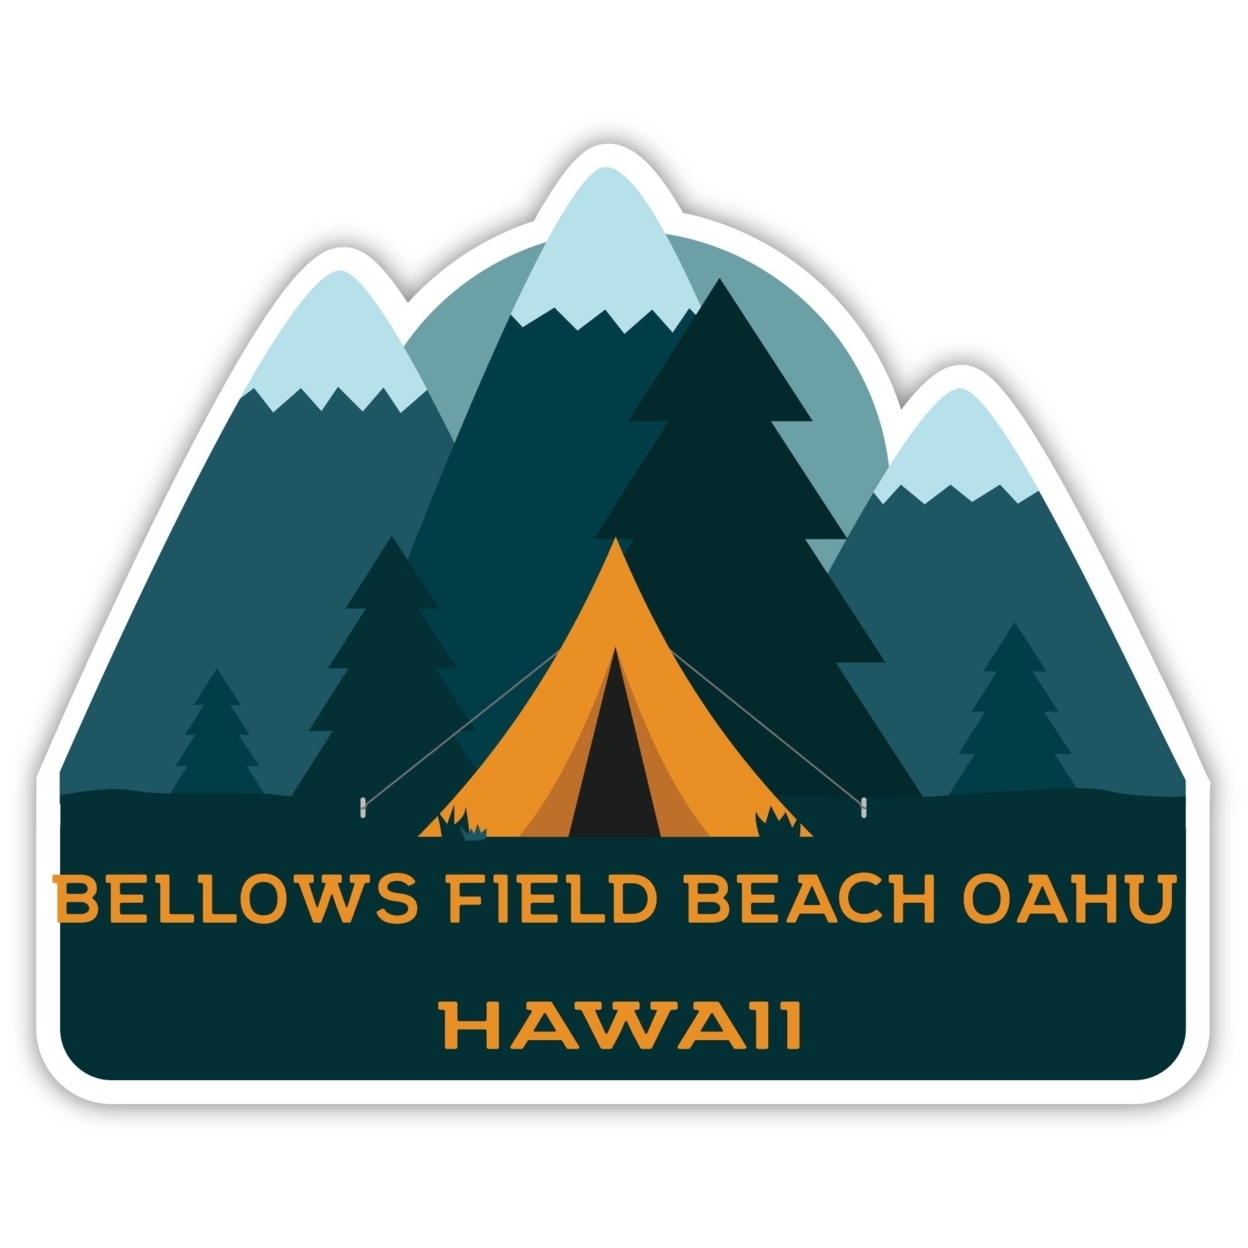 Bellows Field Beach Oahu Hawaii Souvenir Decorative Stickers (Choose Theme And Size) - 4-Pack, 6-Inch, Tent